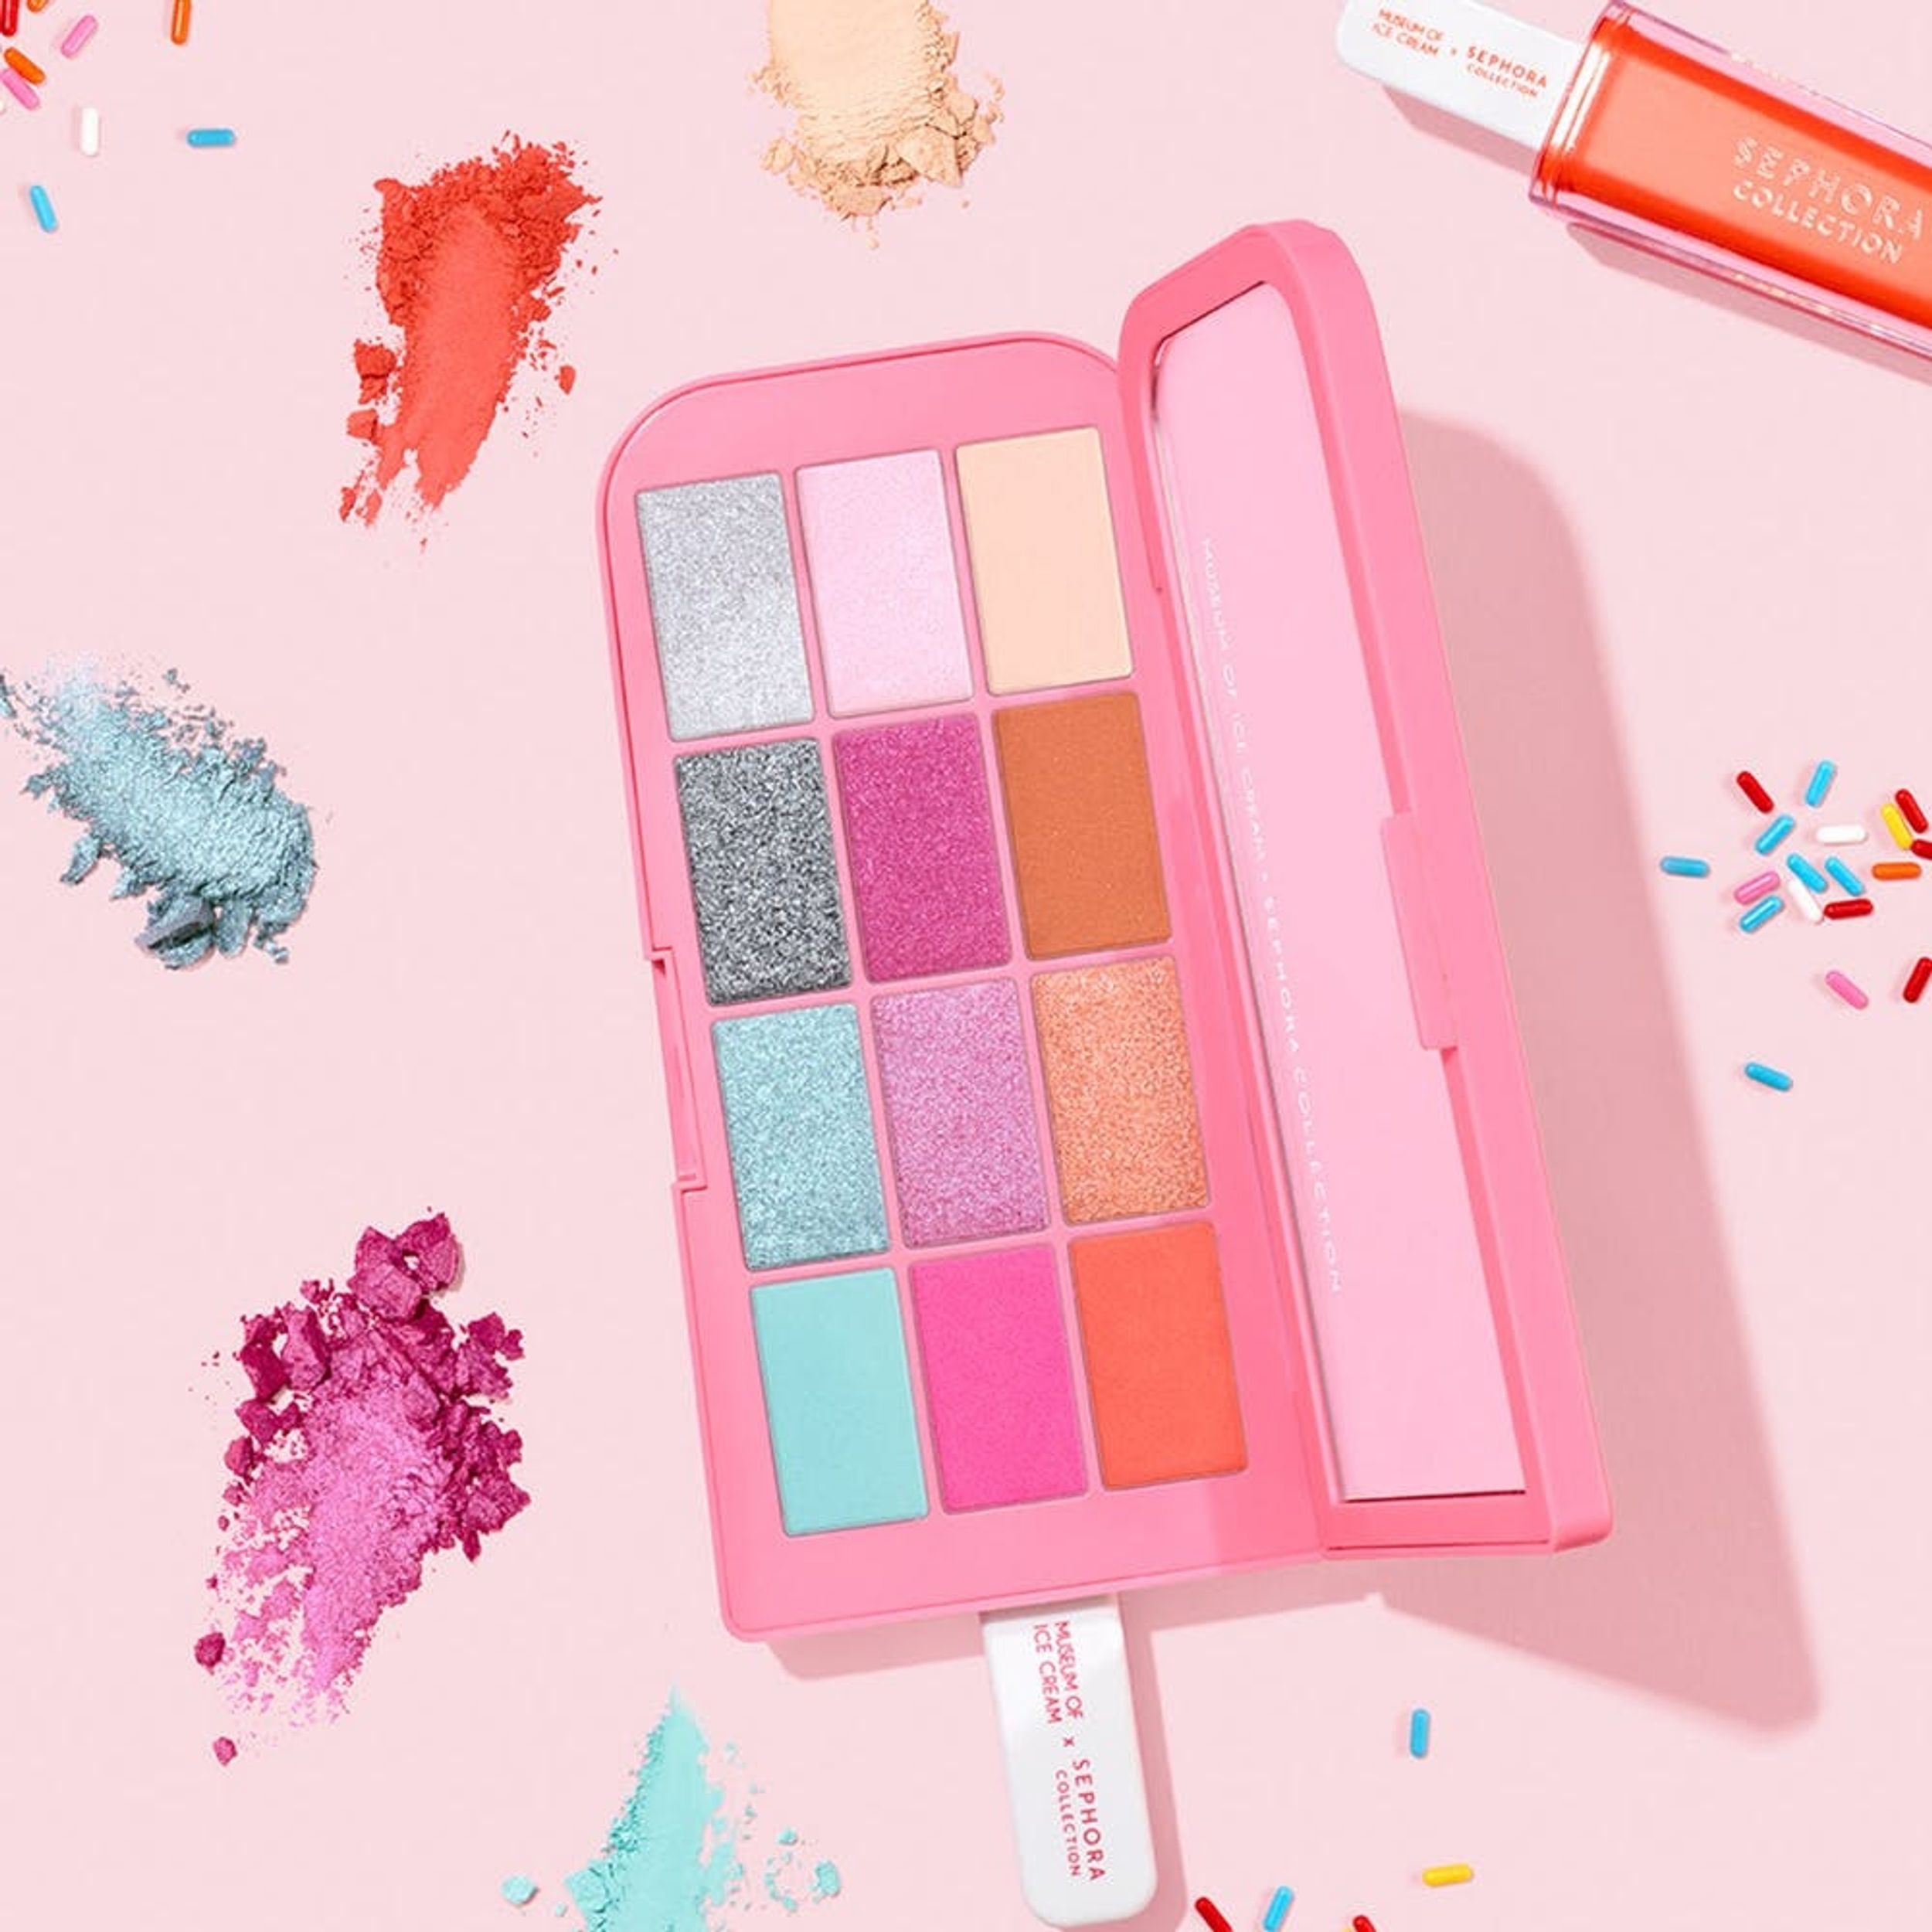 Sephora and Museum of Ice Cream Launch the Sweetest Makeup Collection